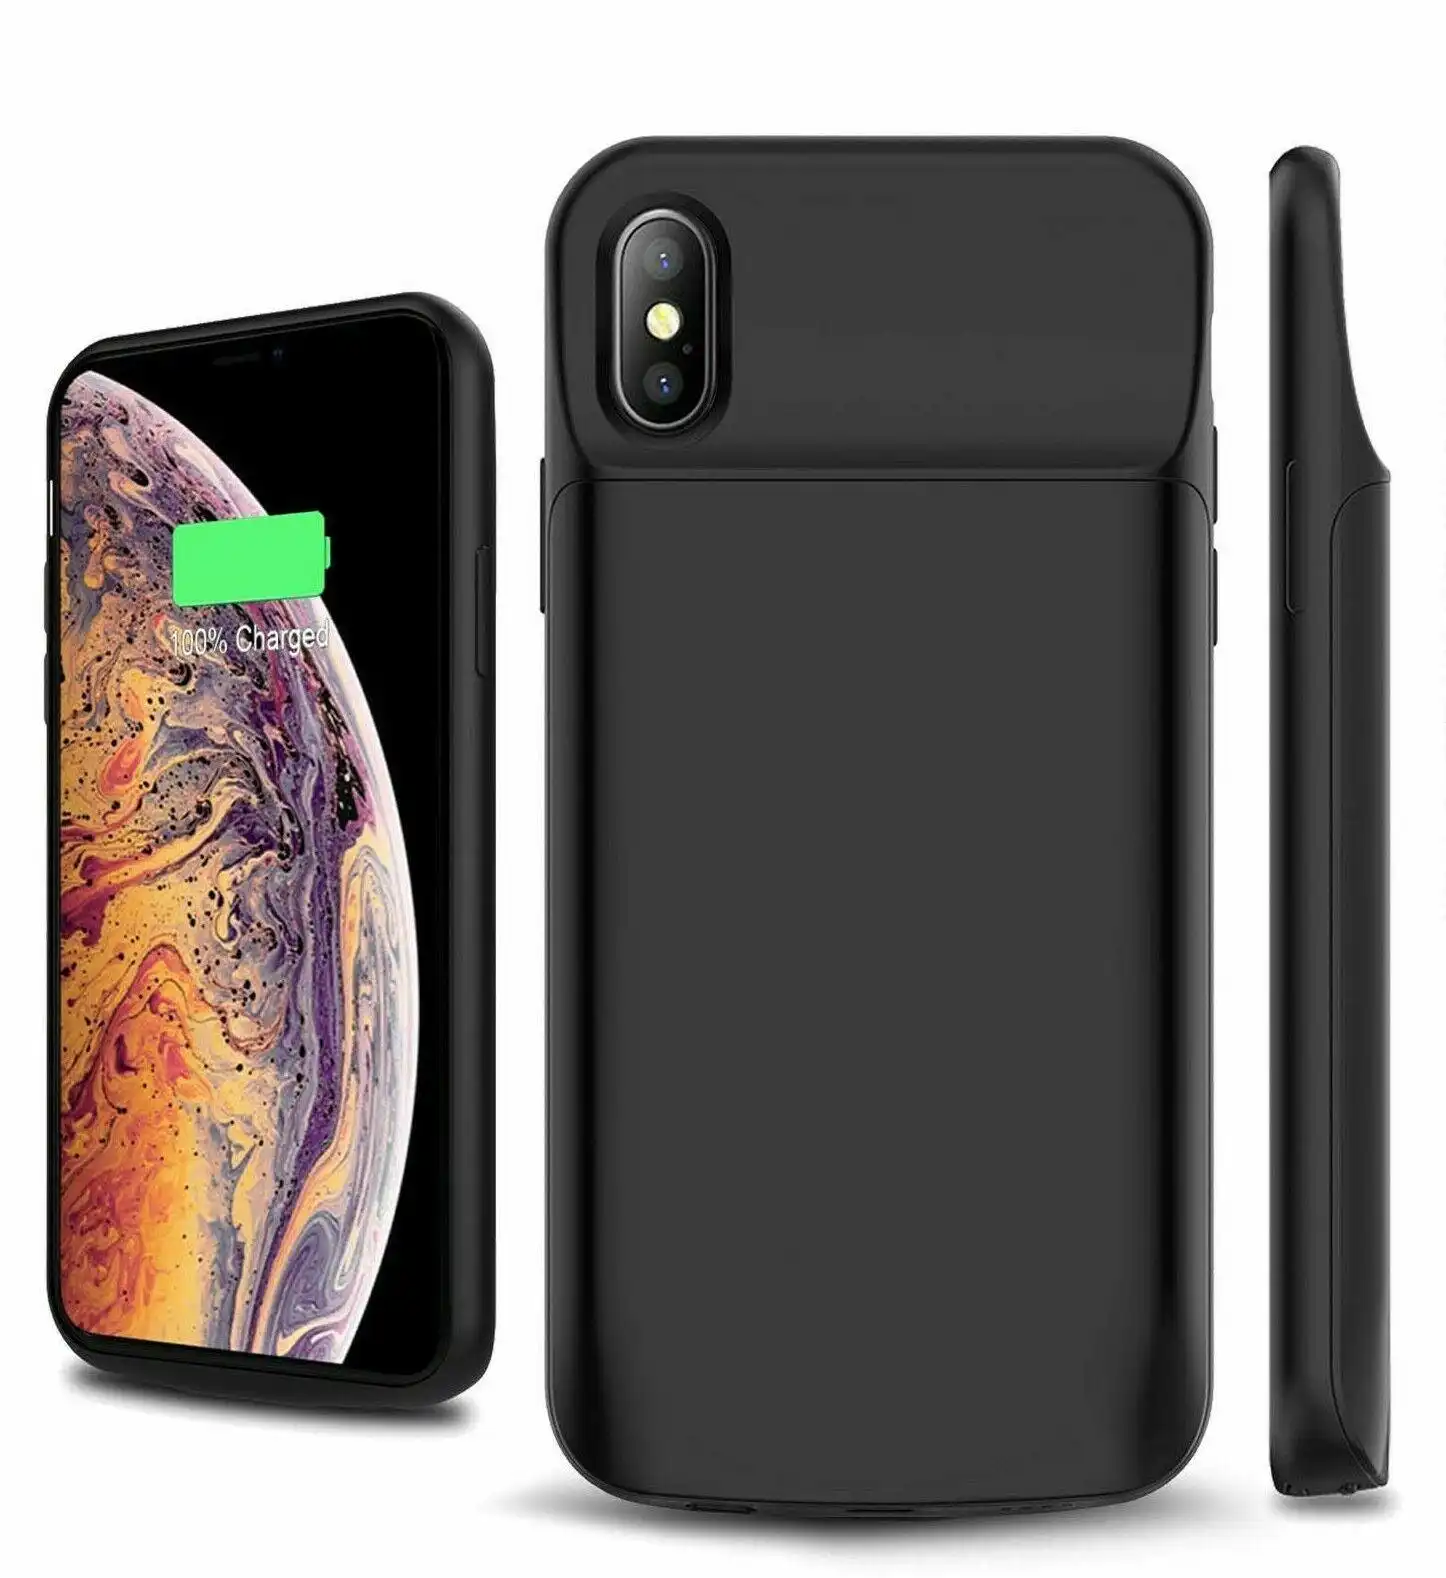 iPhone X Compatible Battery Charging Case